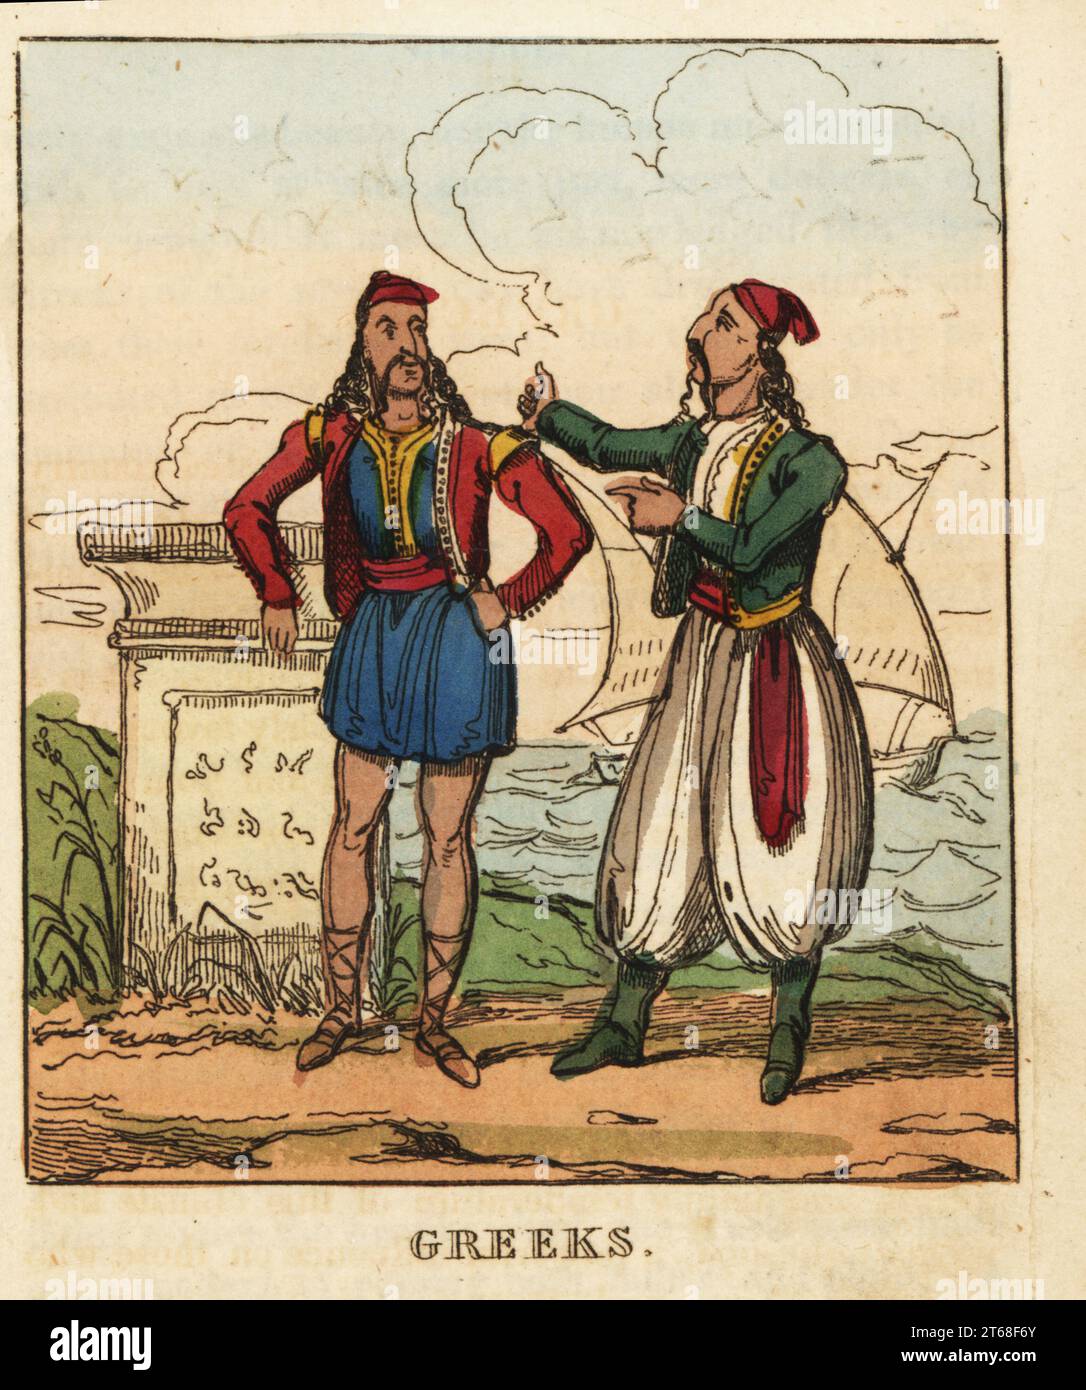 Costumes of Greek men under the Ottoman Empire, early 19th century. One in cap, embroidered vest, sash belt, foustanela or kilt and sandals, the other in harem pants and boots. Handcoloured copperplate engraving from The World in Miniature, or Panorama of the Costumes, Manners & Customs of All Nations, John Bysh, London, 1825. Stock Photo